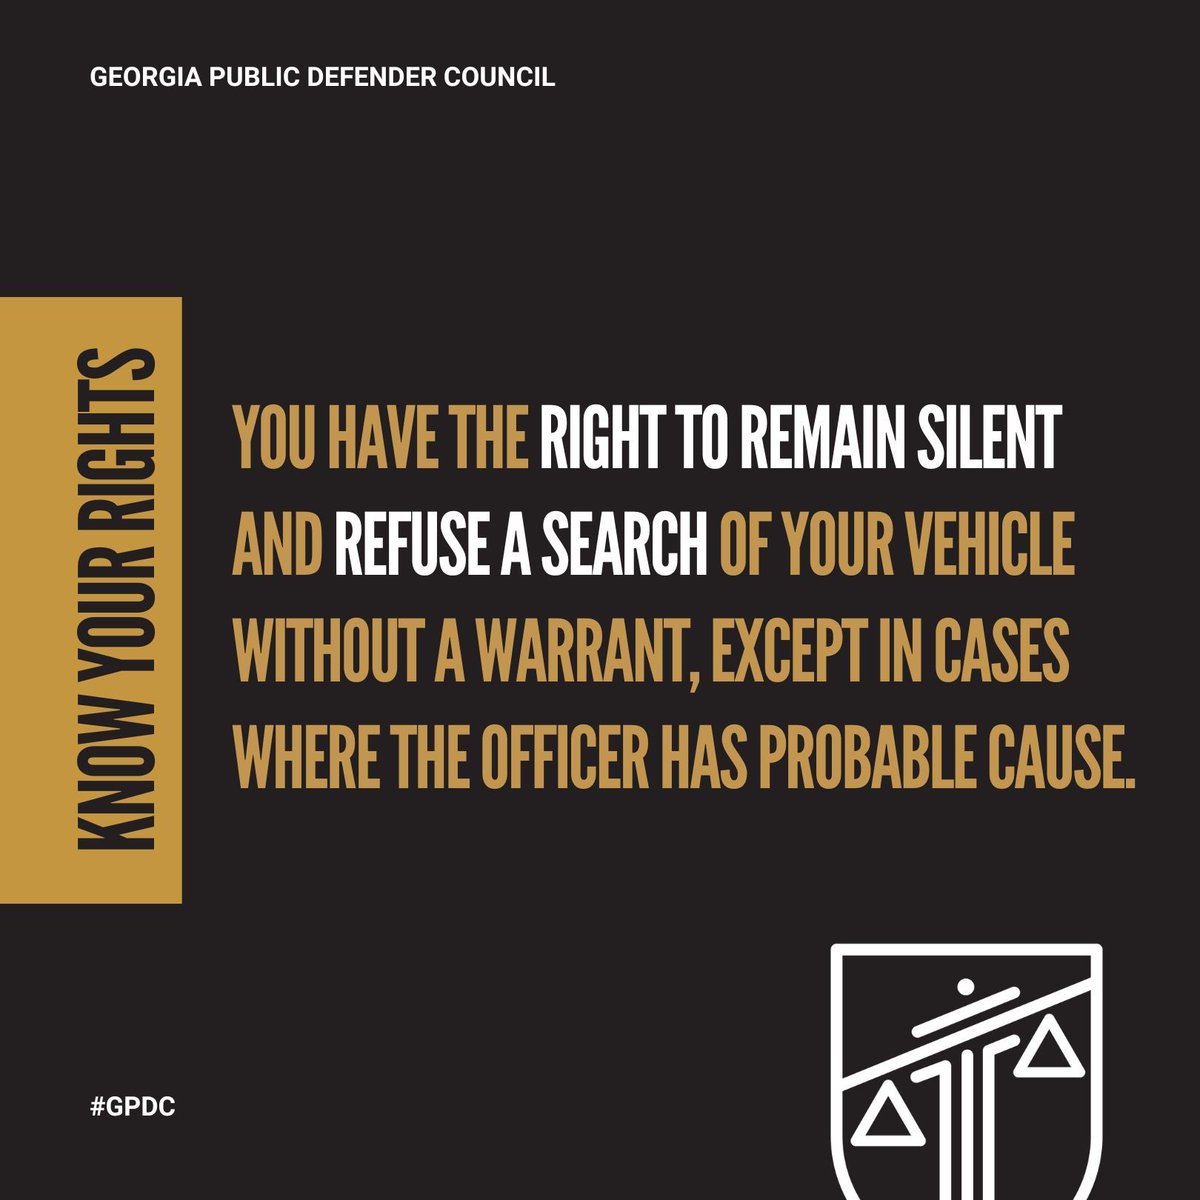 🚗✋ Know your rights on the road! You have the right to remain silent and can refuse a vehicle search if there's no warrant. Exceptions apply if an officer has probable cause. Stay informed and stay safe!

Have any questions? Give us a call at (833) 435-8351. #KnowYourRights